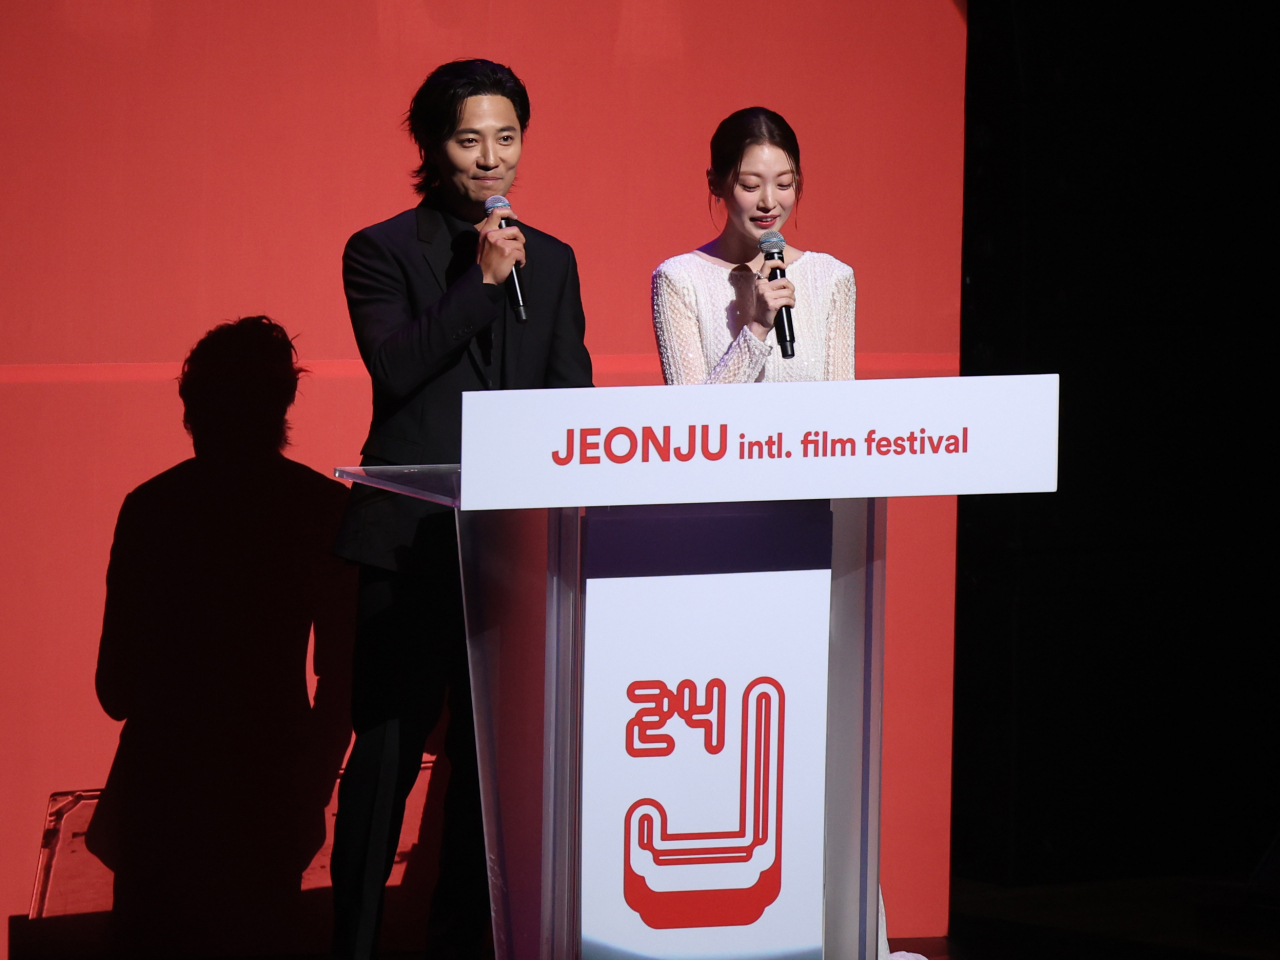 Actors Jin Goo and Gong Seung-yeon were the hosts of the opening ceremony of the 24th Jeonju International Film Festival, held at Sori Arts Center in Jeonju, Thursday. (Yonhap)